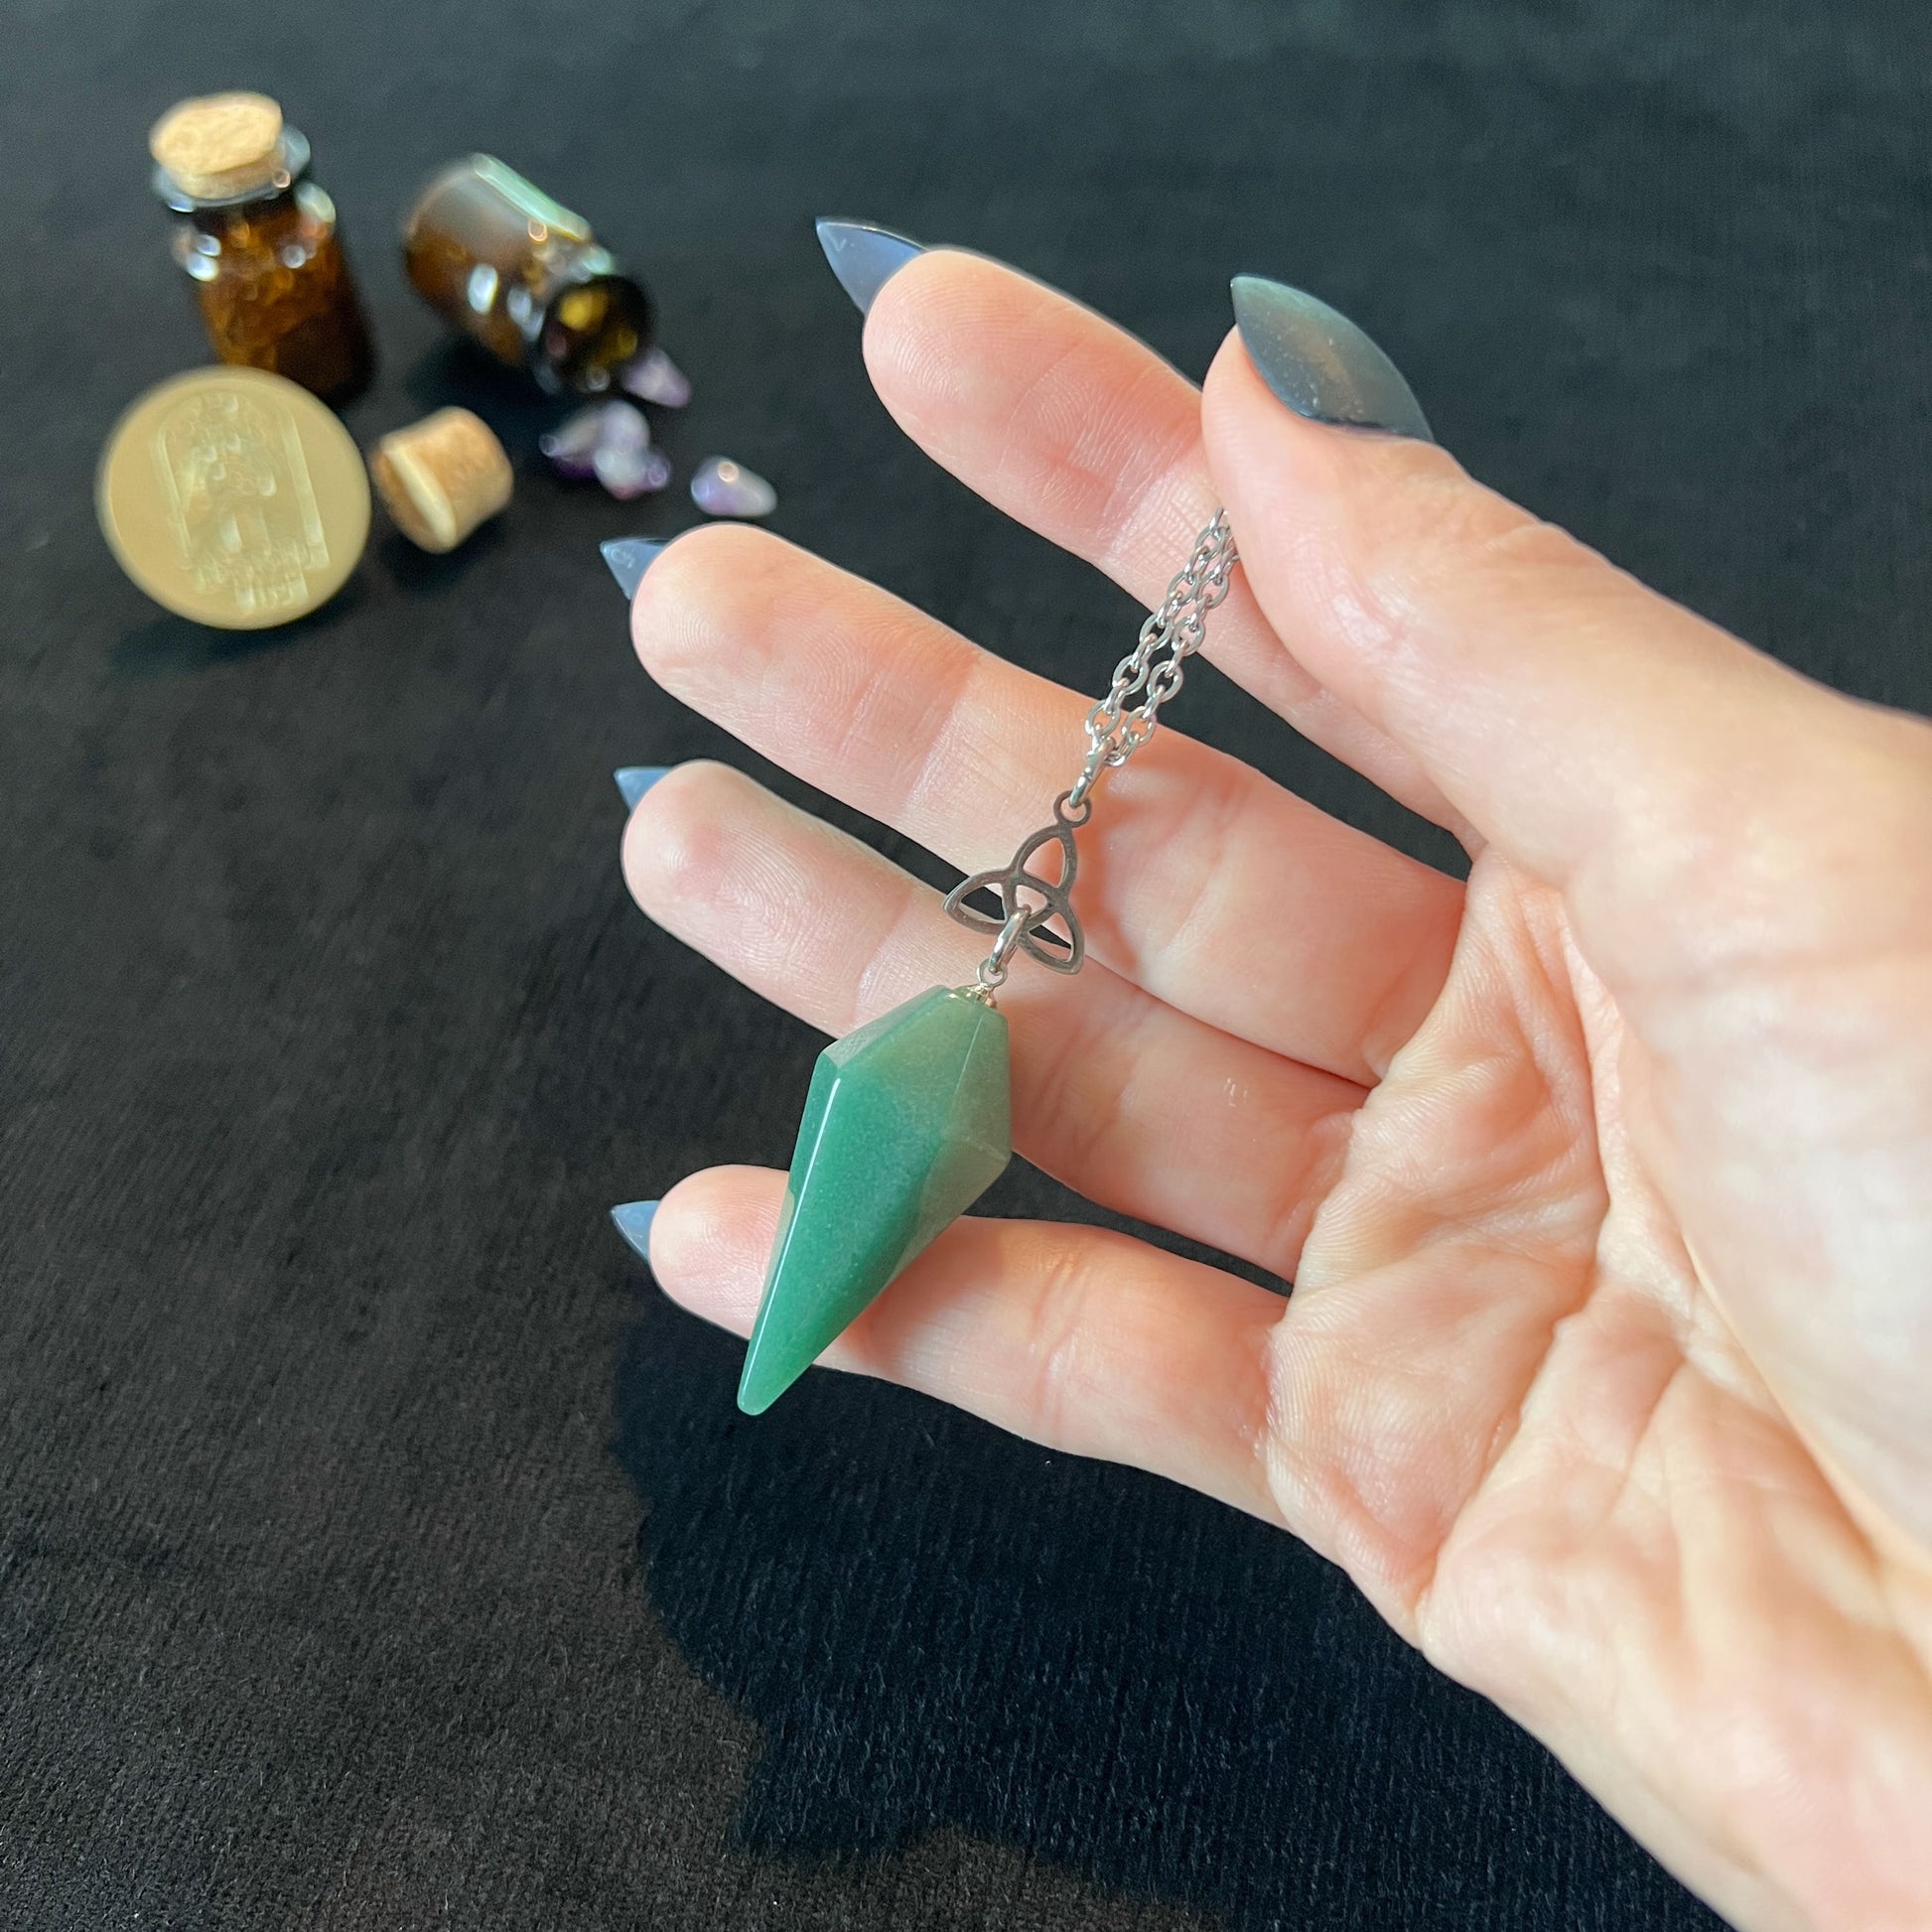 aventurine gemstone pendulum necklace witch divination tool with triquetra celtic knot pagan witchcraft symbol for dowsing reiki psychic medium jewelry